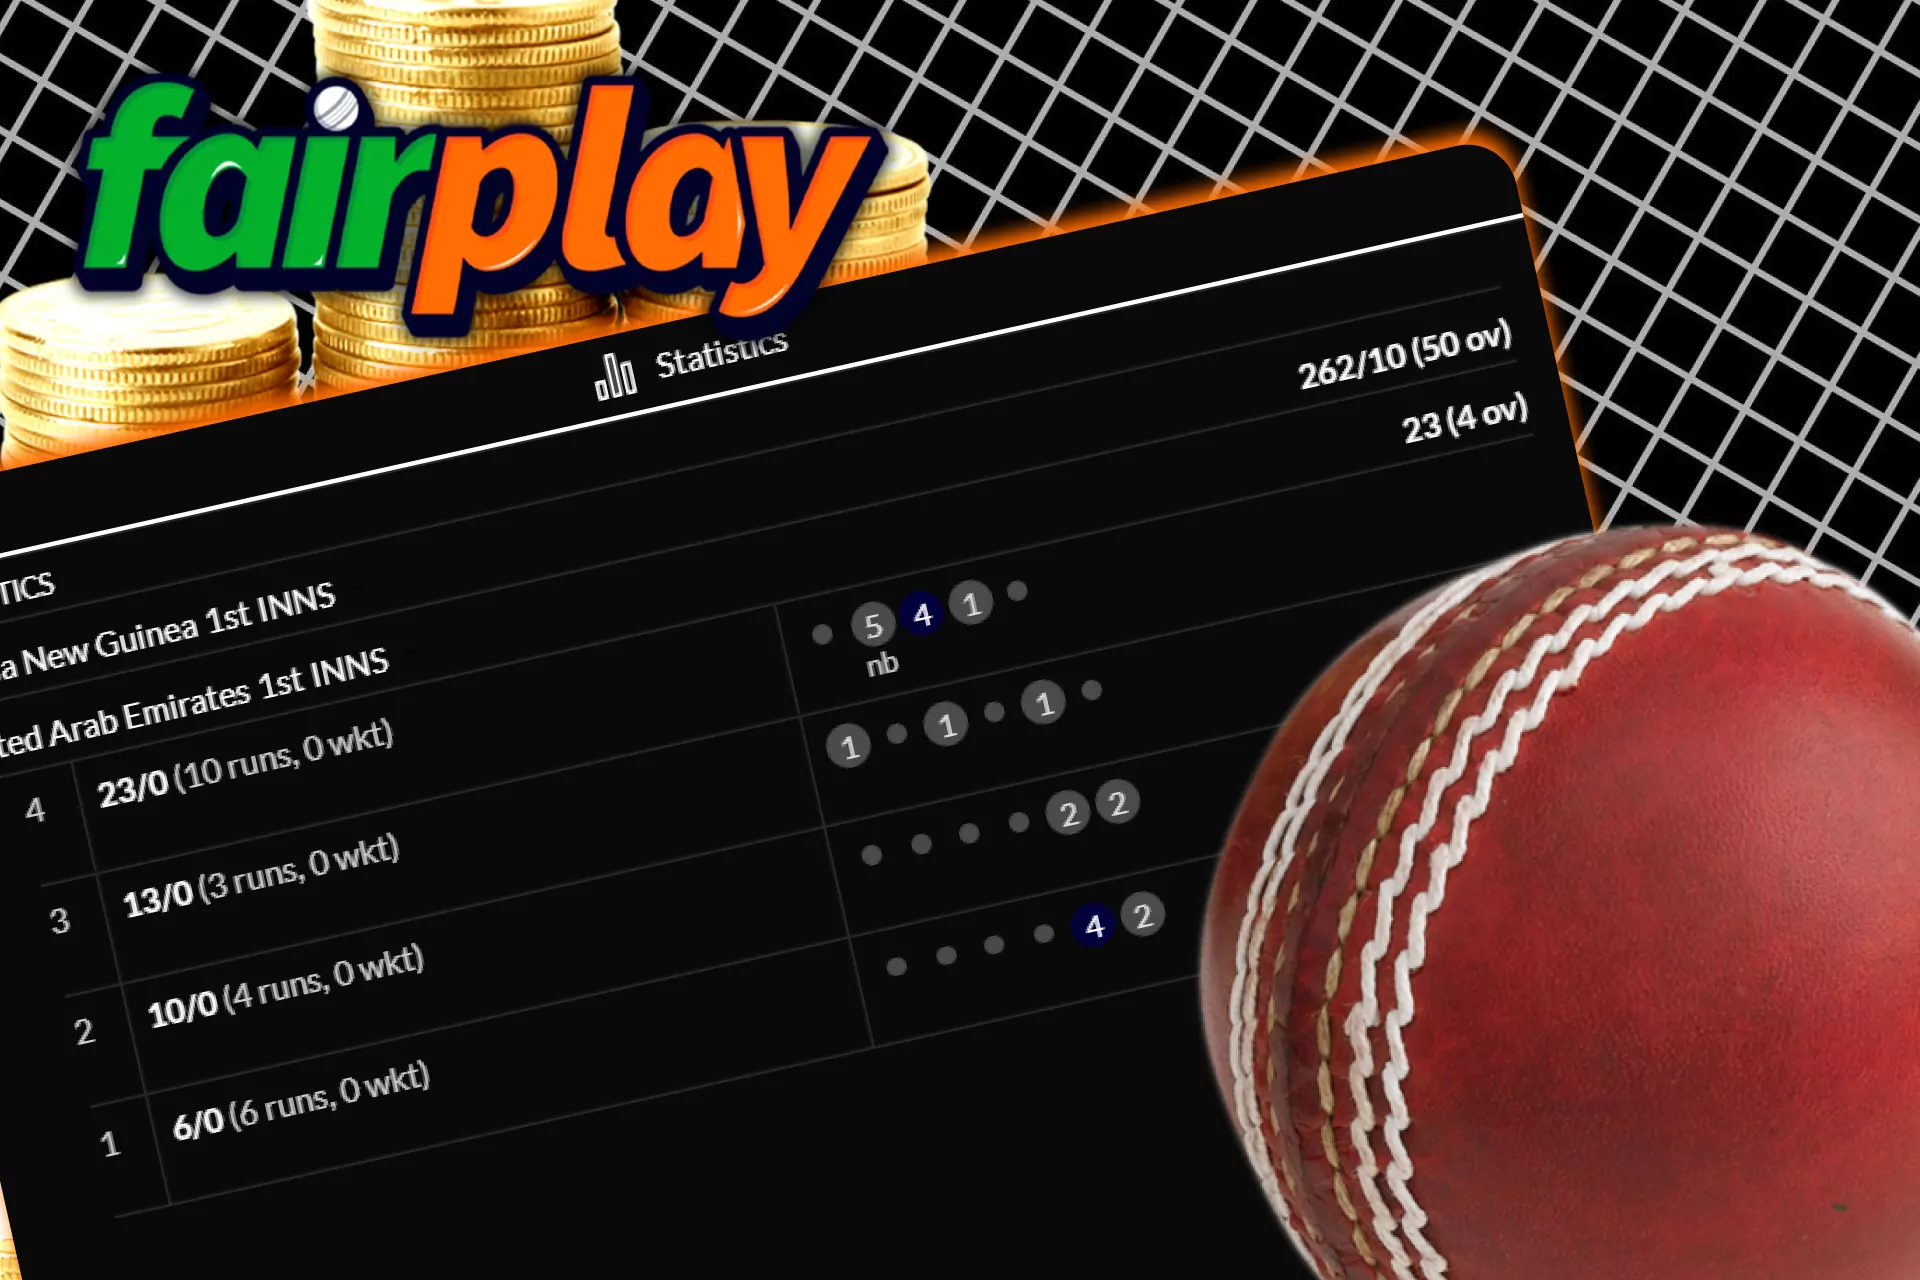 Follow the results of the games on Fairplay.